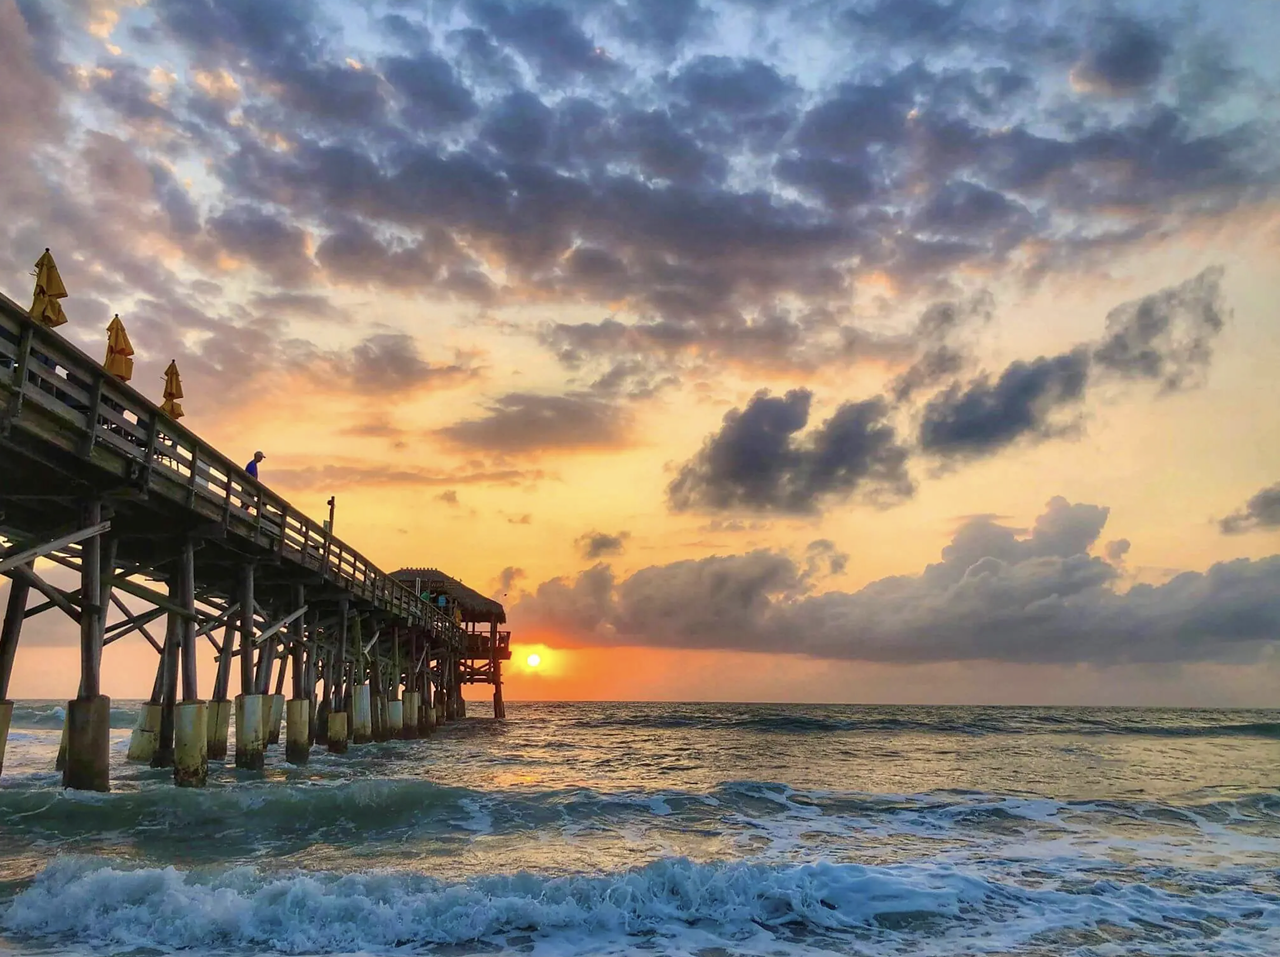 Cocoa Beach
1 hour from Orlando
Cocoa Beach is a classic Florida beach town with picturesque waters and miles of sand. Visit the pier during sunset for a bite to eat and walk around to enjoy the east coast Florida sky.